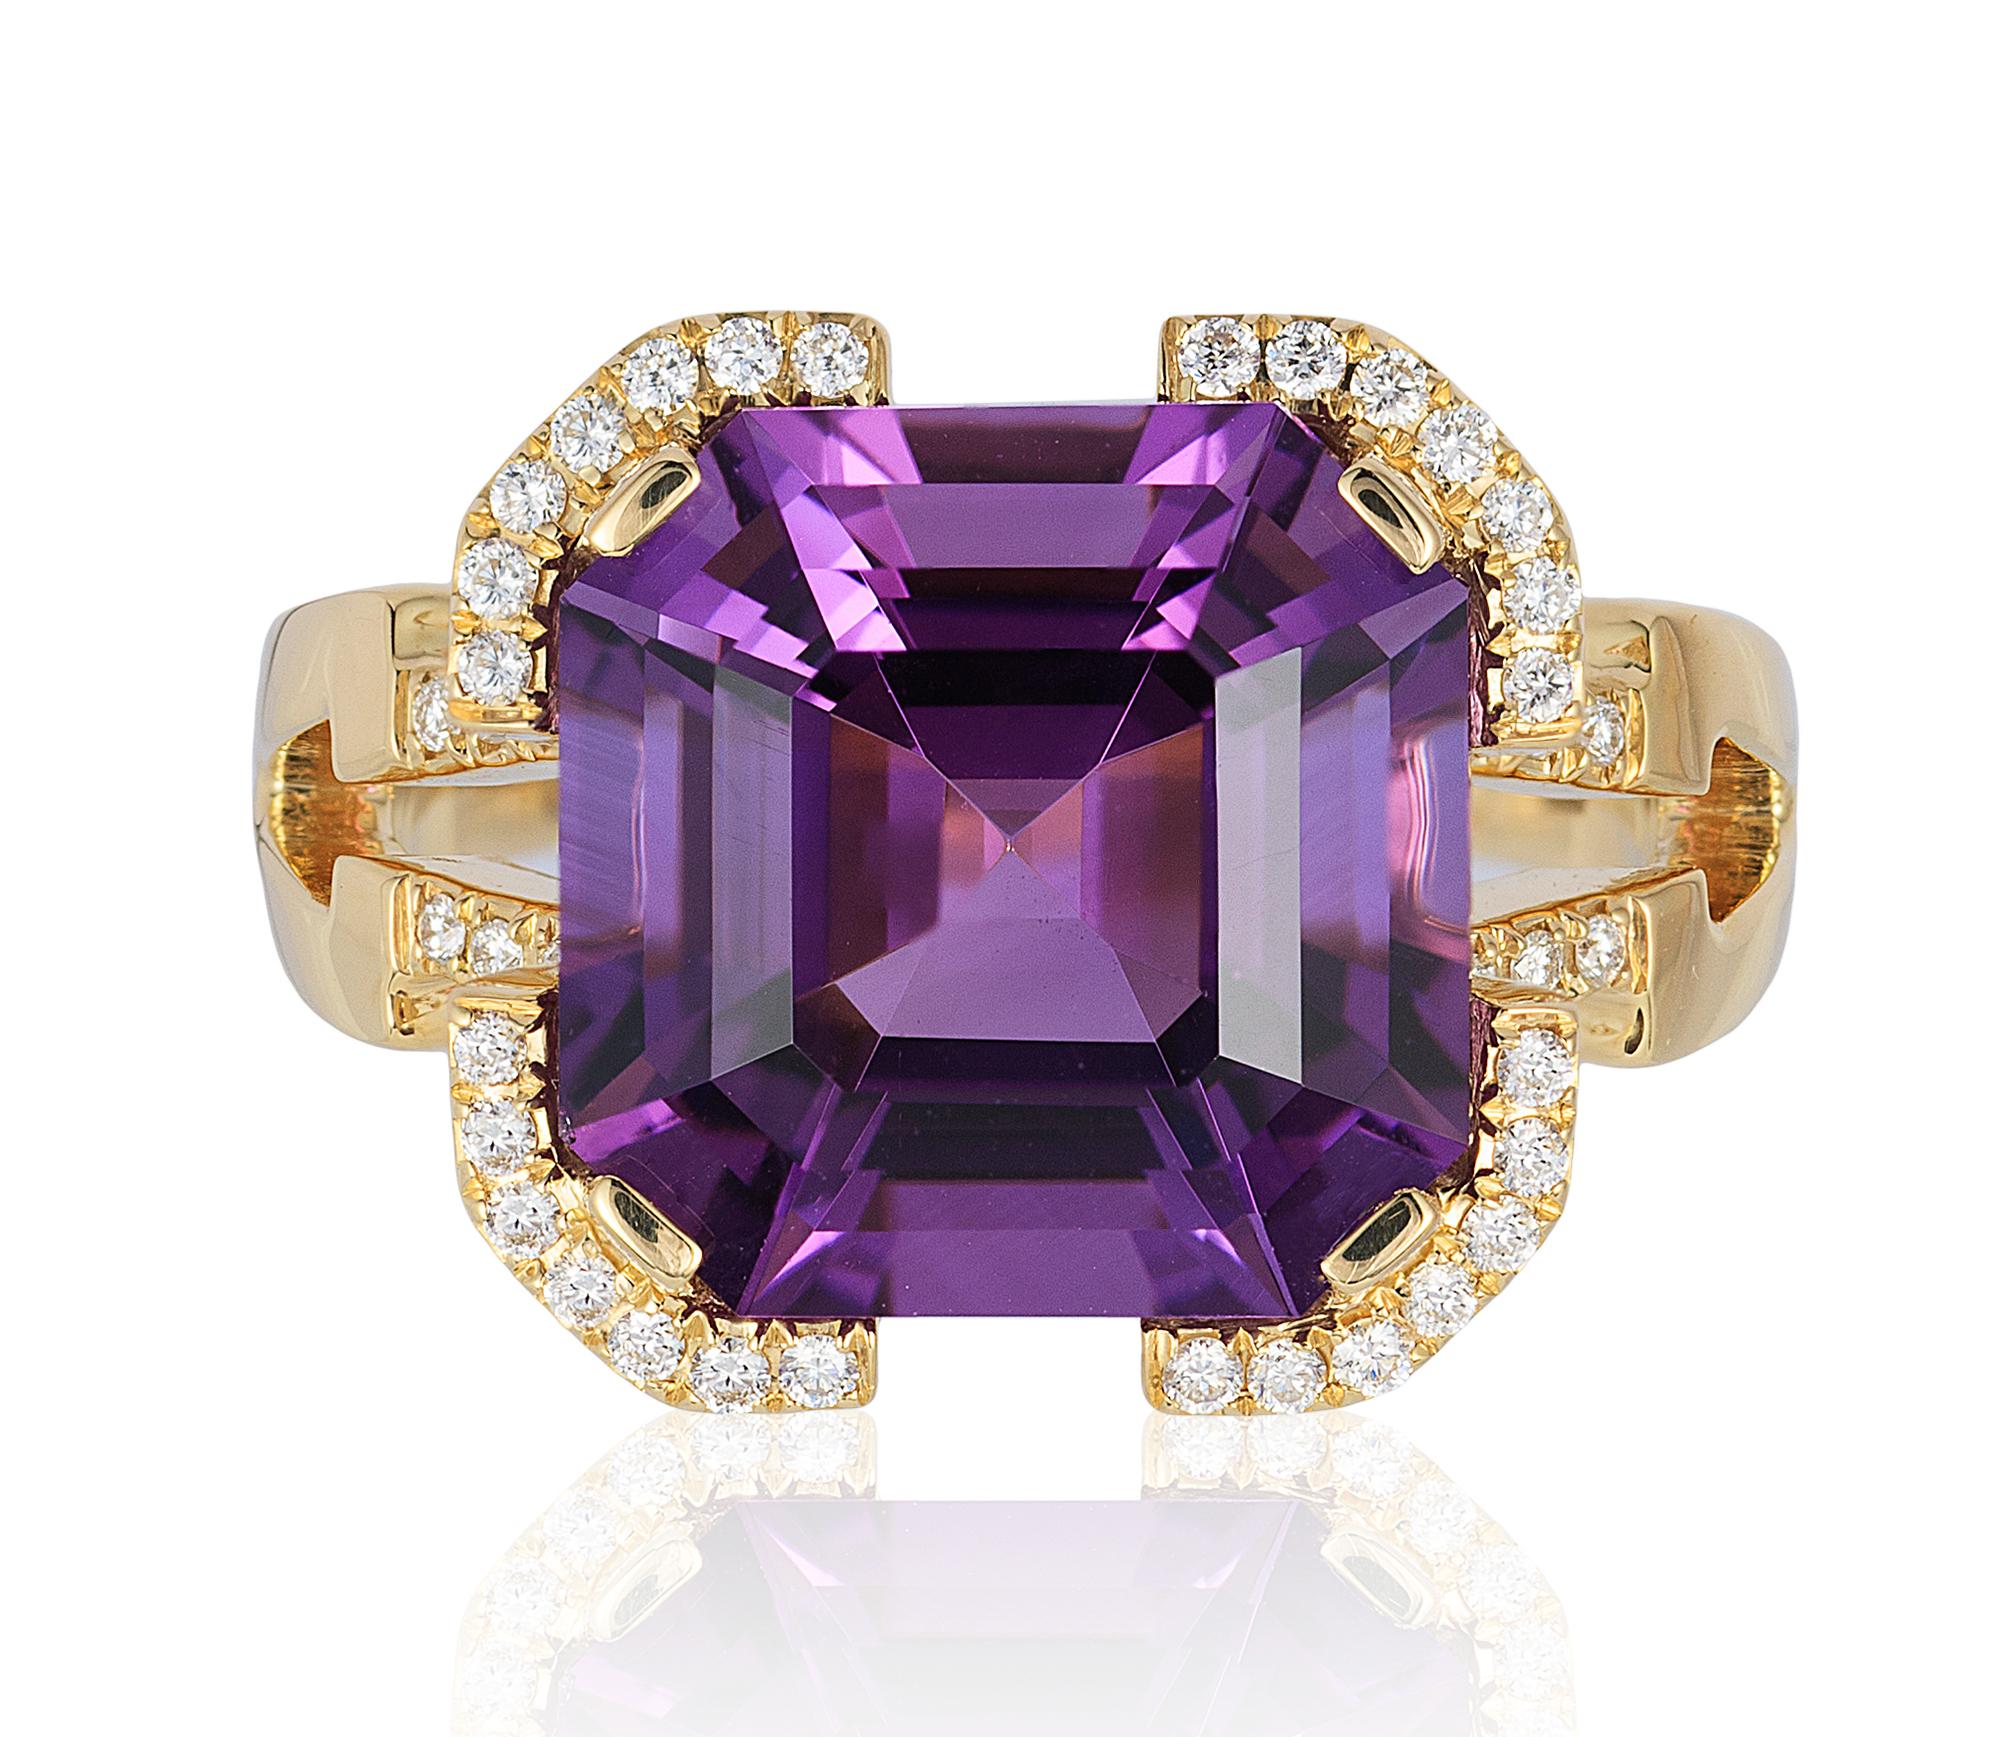 This Amethyst Emerald Cut Ring is a stunning piece of jewelry from the 'Gossip' Collection that features a beautiful purple amethyst gemstone cut in an emerald shape. The ring is made of 18K yellow gold, adding to its luxurious appeal, and is